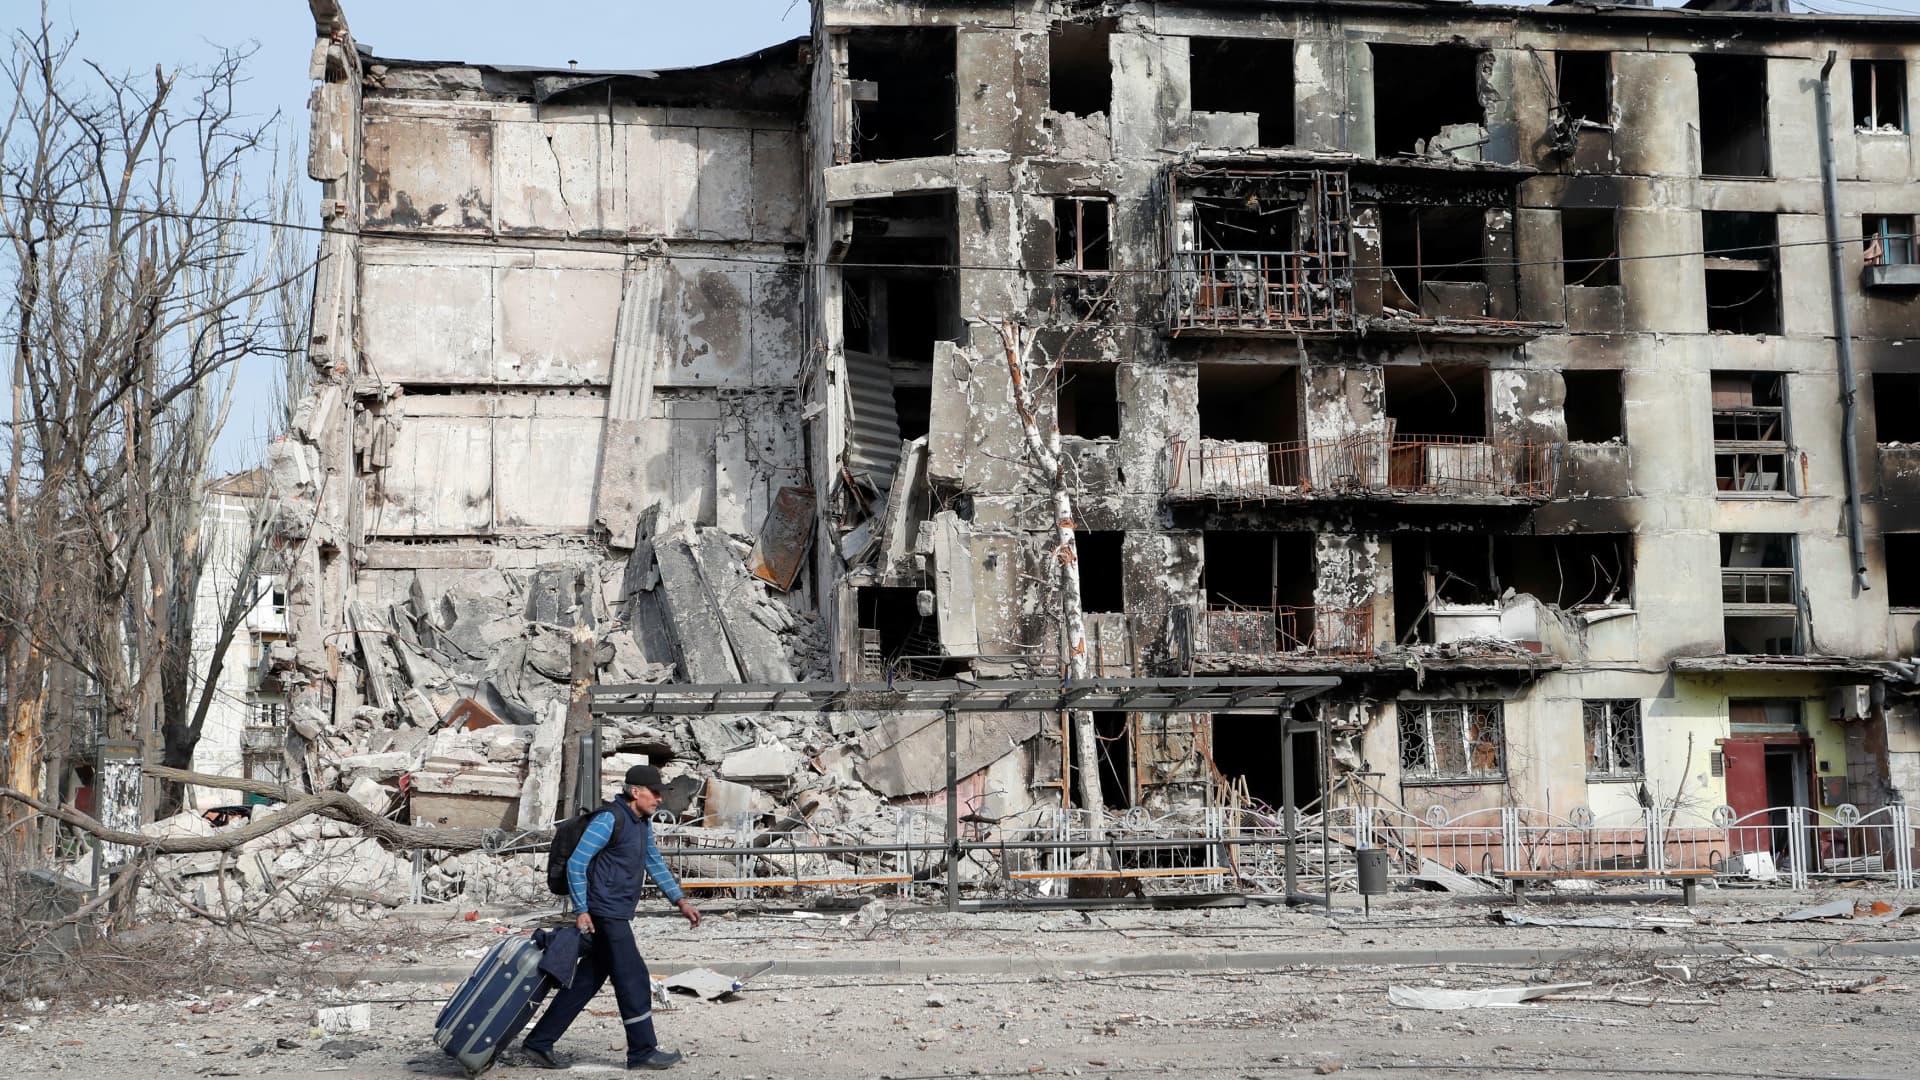 A man walks past a residential building that was destroyed during Ukraine-Russia conflict in the southern port city of Mariupol, Ukraine, on April 17, 2022.